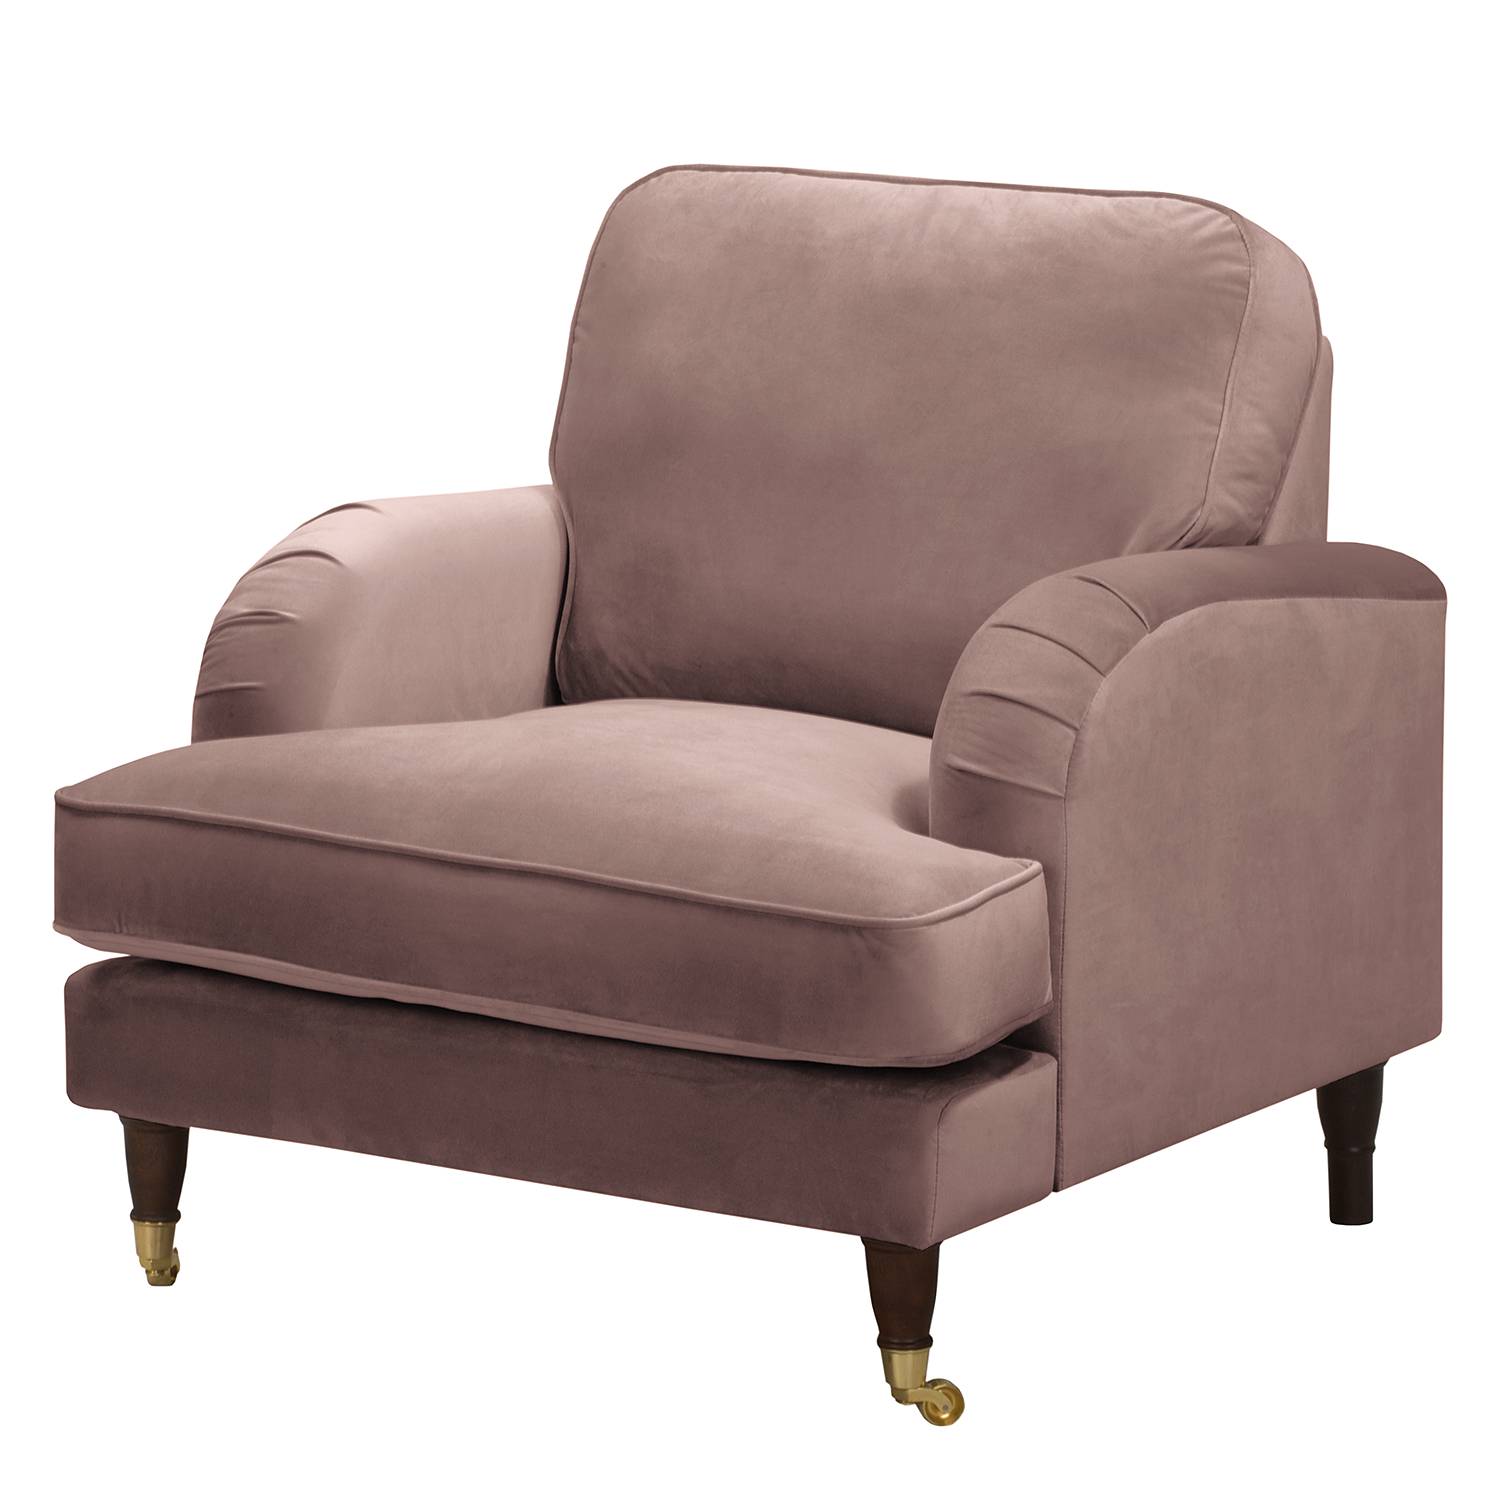 Image of Fauteuil Bethania I 000000001000145875